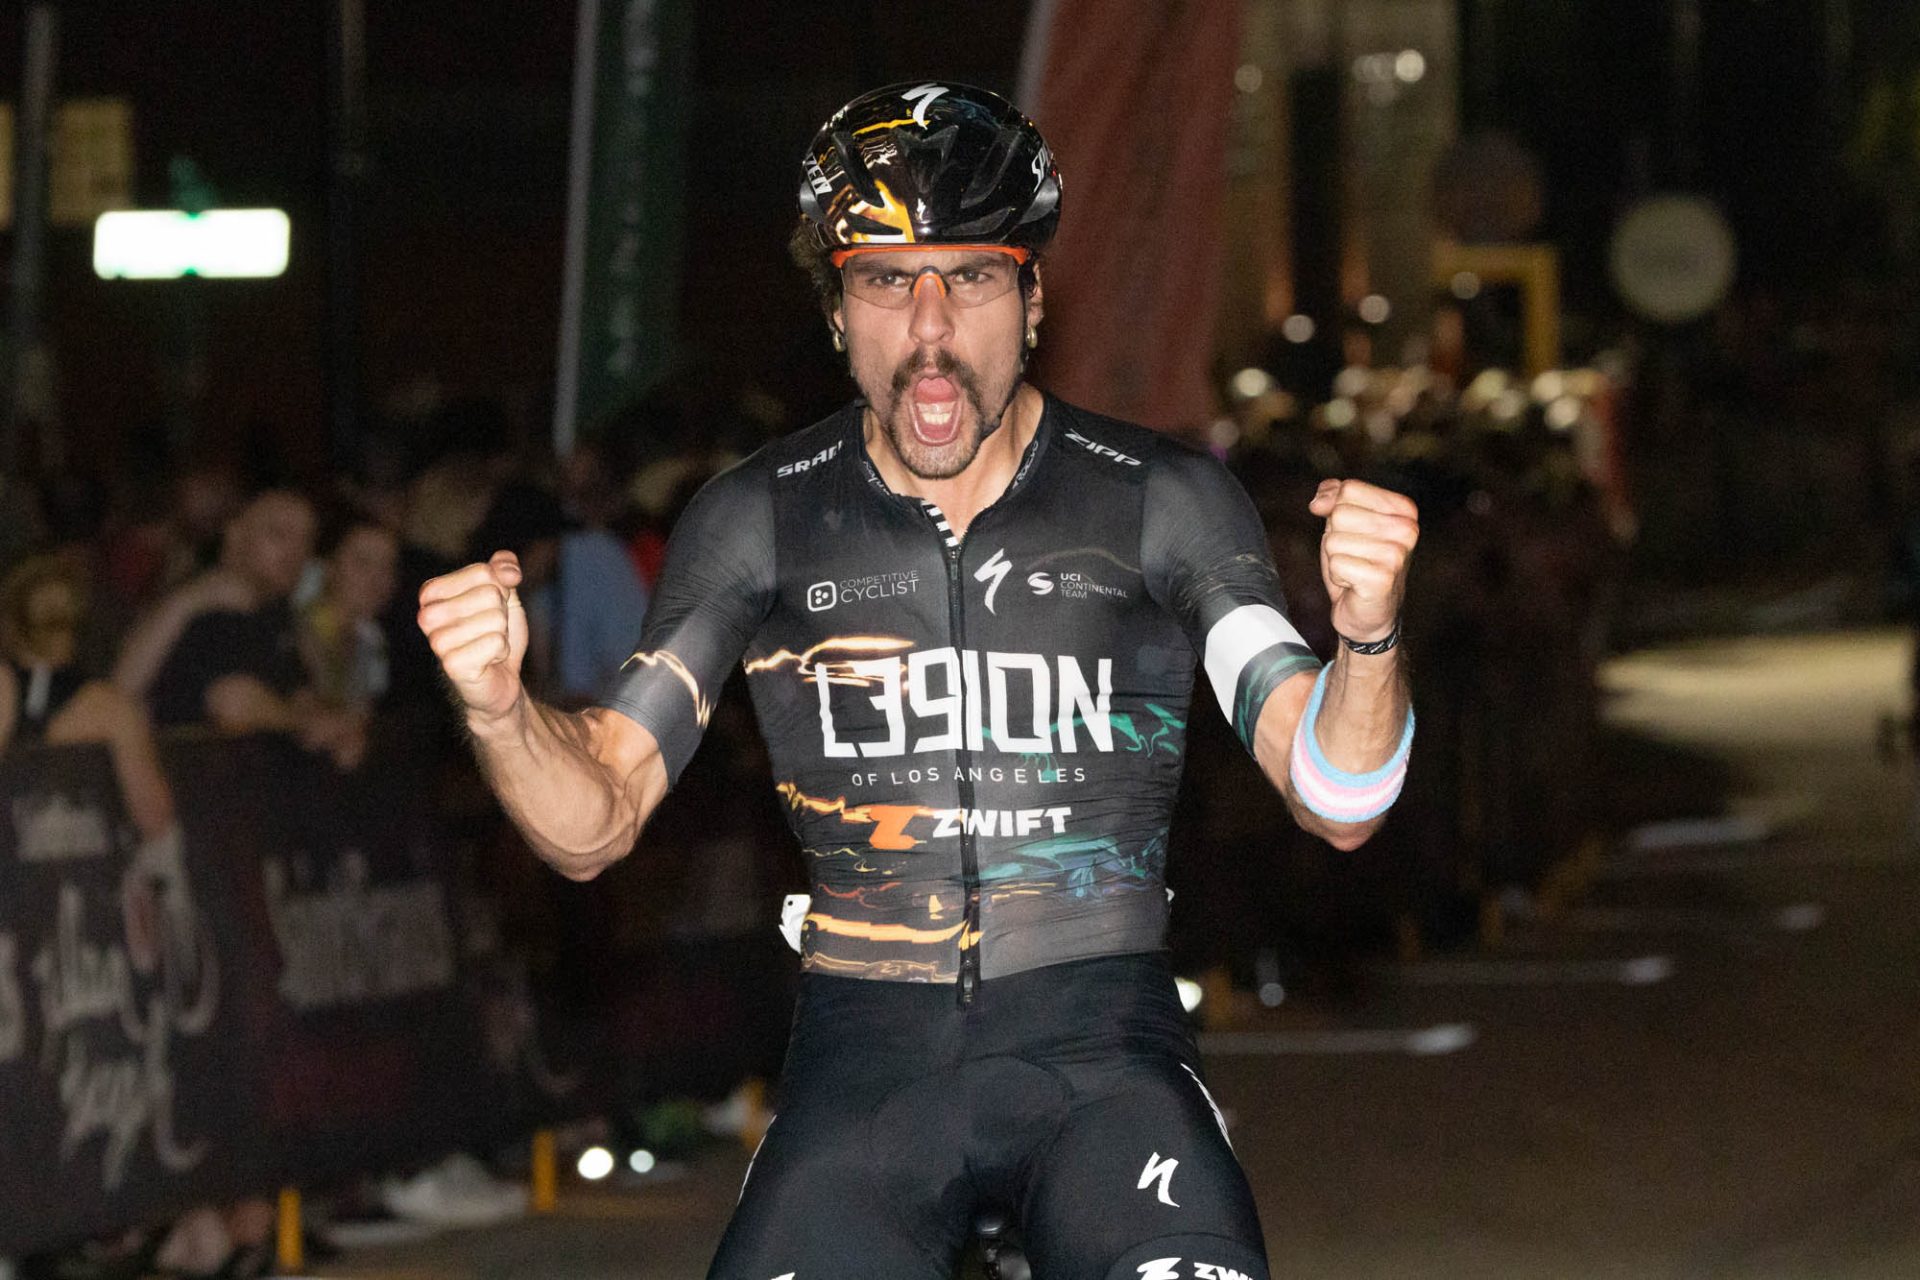 Sam Boardman celebrates a win. He's racing at night, in a black L39ION kit, and he's sitting up on the bike, both arms raised and hands clenched into fists as he lets out a yell.